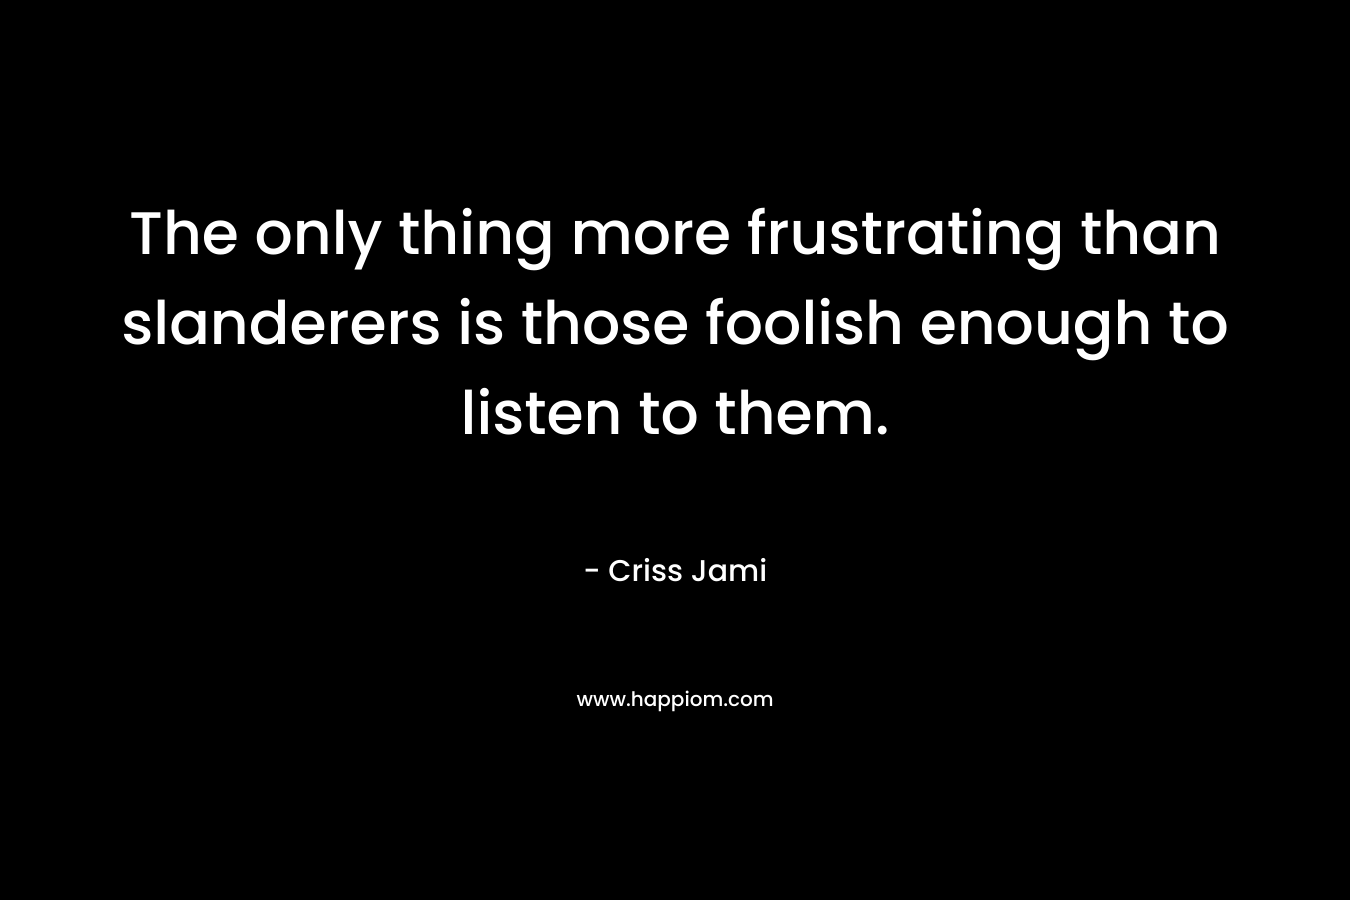 The only thing more frustrating than slanderers is those foolish enough to listen to them. – Criss Jami